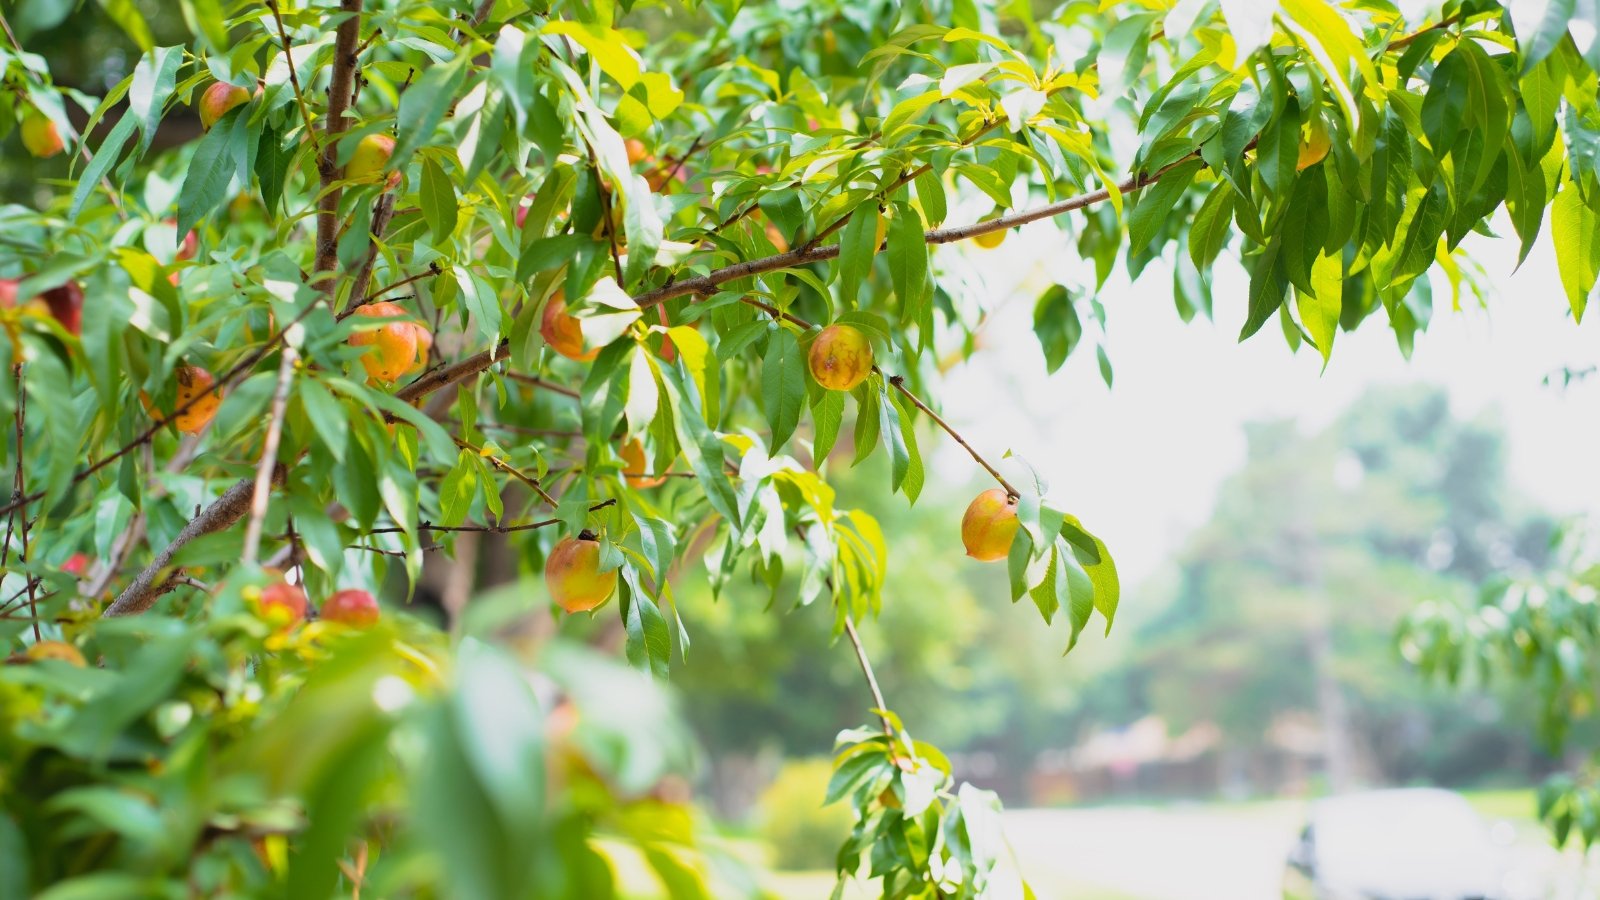 The nectarine tree in the sunny garden displays vibrant, smooth-skinned nectarines nestled among its glossy green leaves, with the fruits' red and yellow hues glowing in the sunlight.